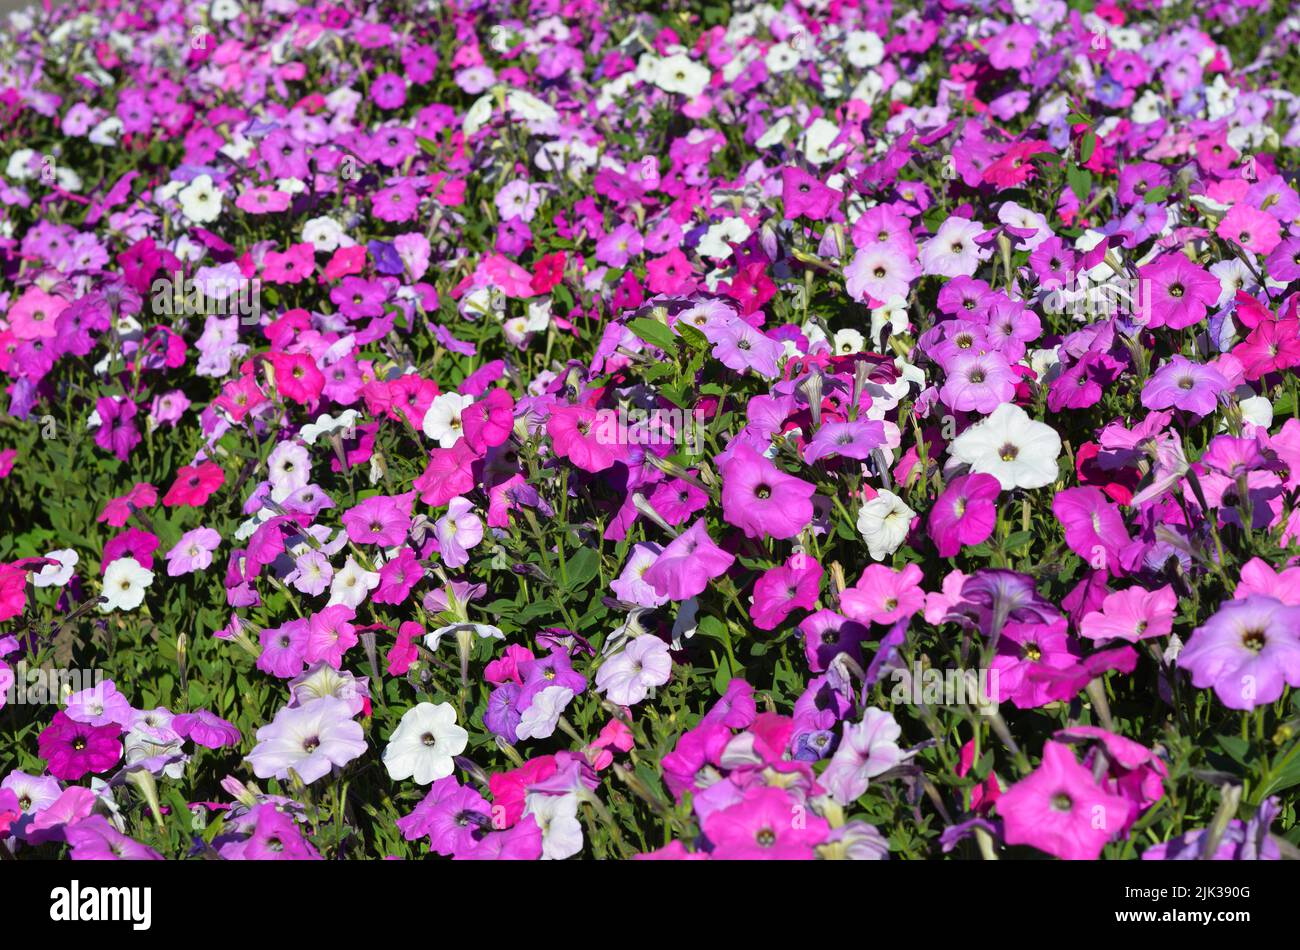 A pink, white and purple common garden petunia background. Blooming multiflora petunias in the flowerbed with pink flowers covering the ground. Stock Photo